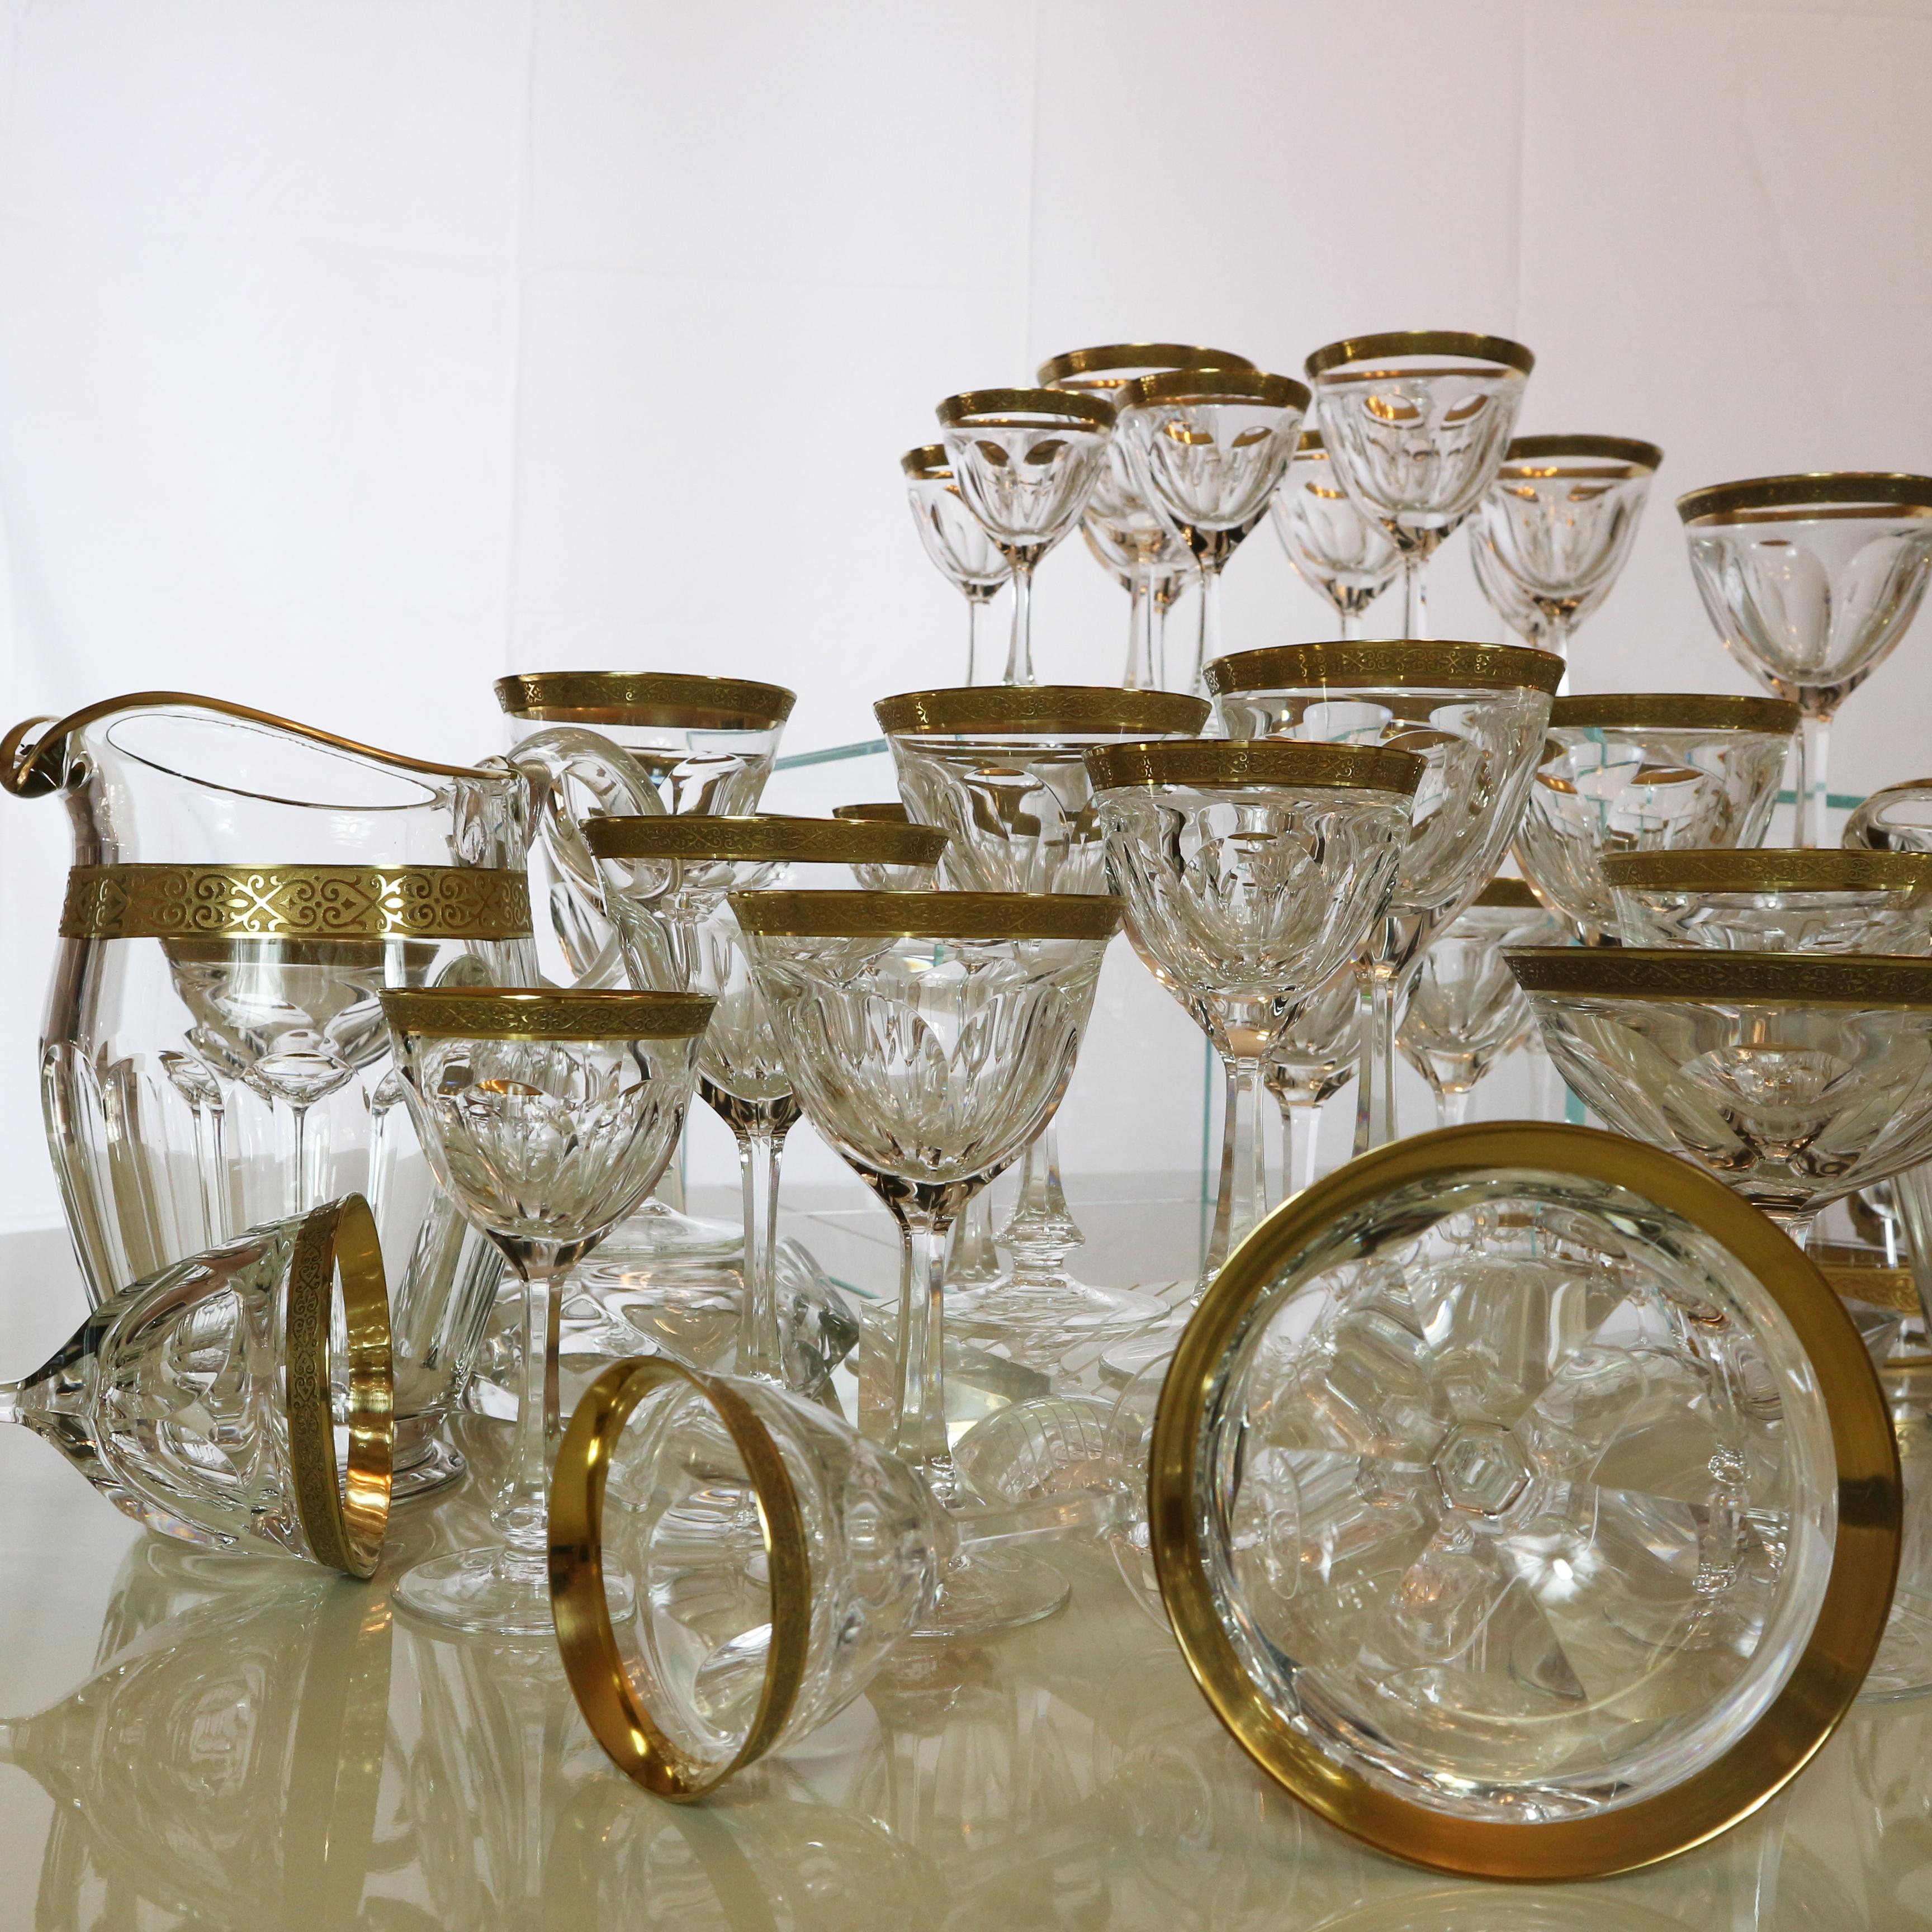 A set composed of 63 pieces Lady Hamilton from Moser glass works.
Featuring ornate handcut details and a thick 24-carat gold. Quality and elegance of the Moser creation.
The service consists of:
-12 water goblets measures: height 17.50 cm,